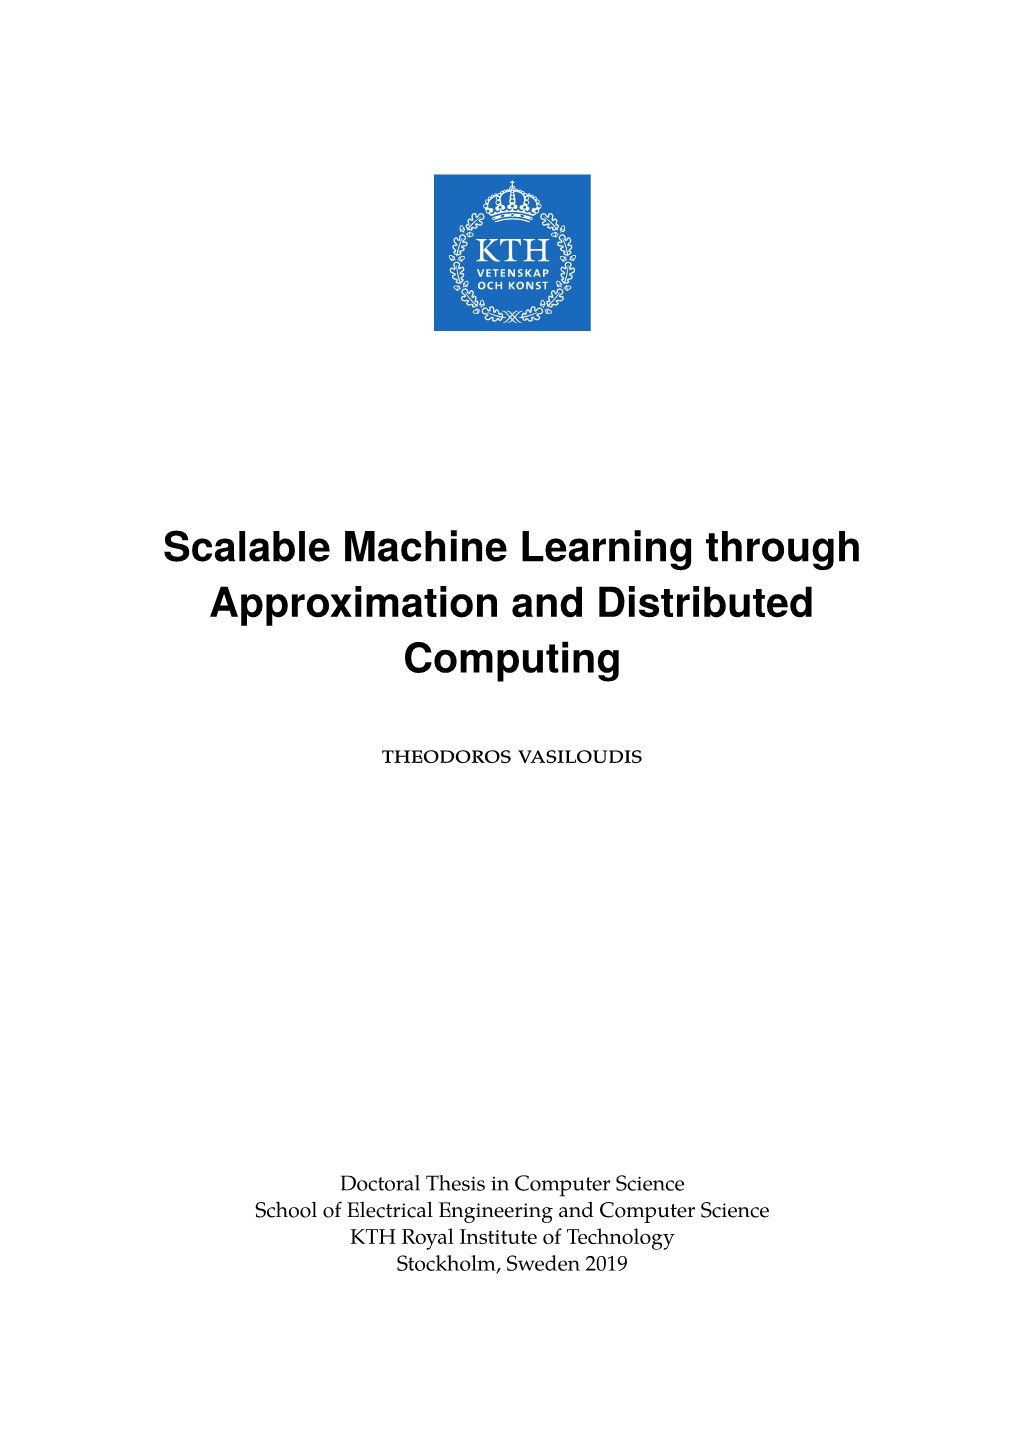 Scalable Machine Learning Through Approximation and Distributed Computing